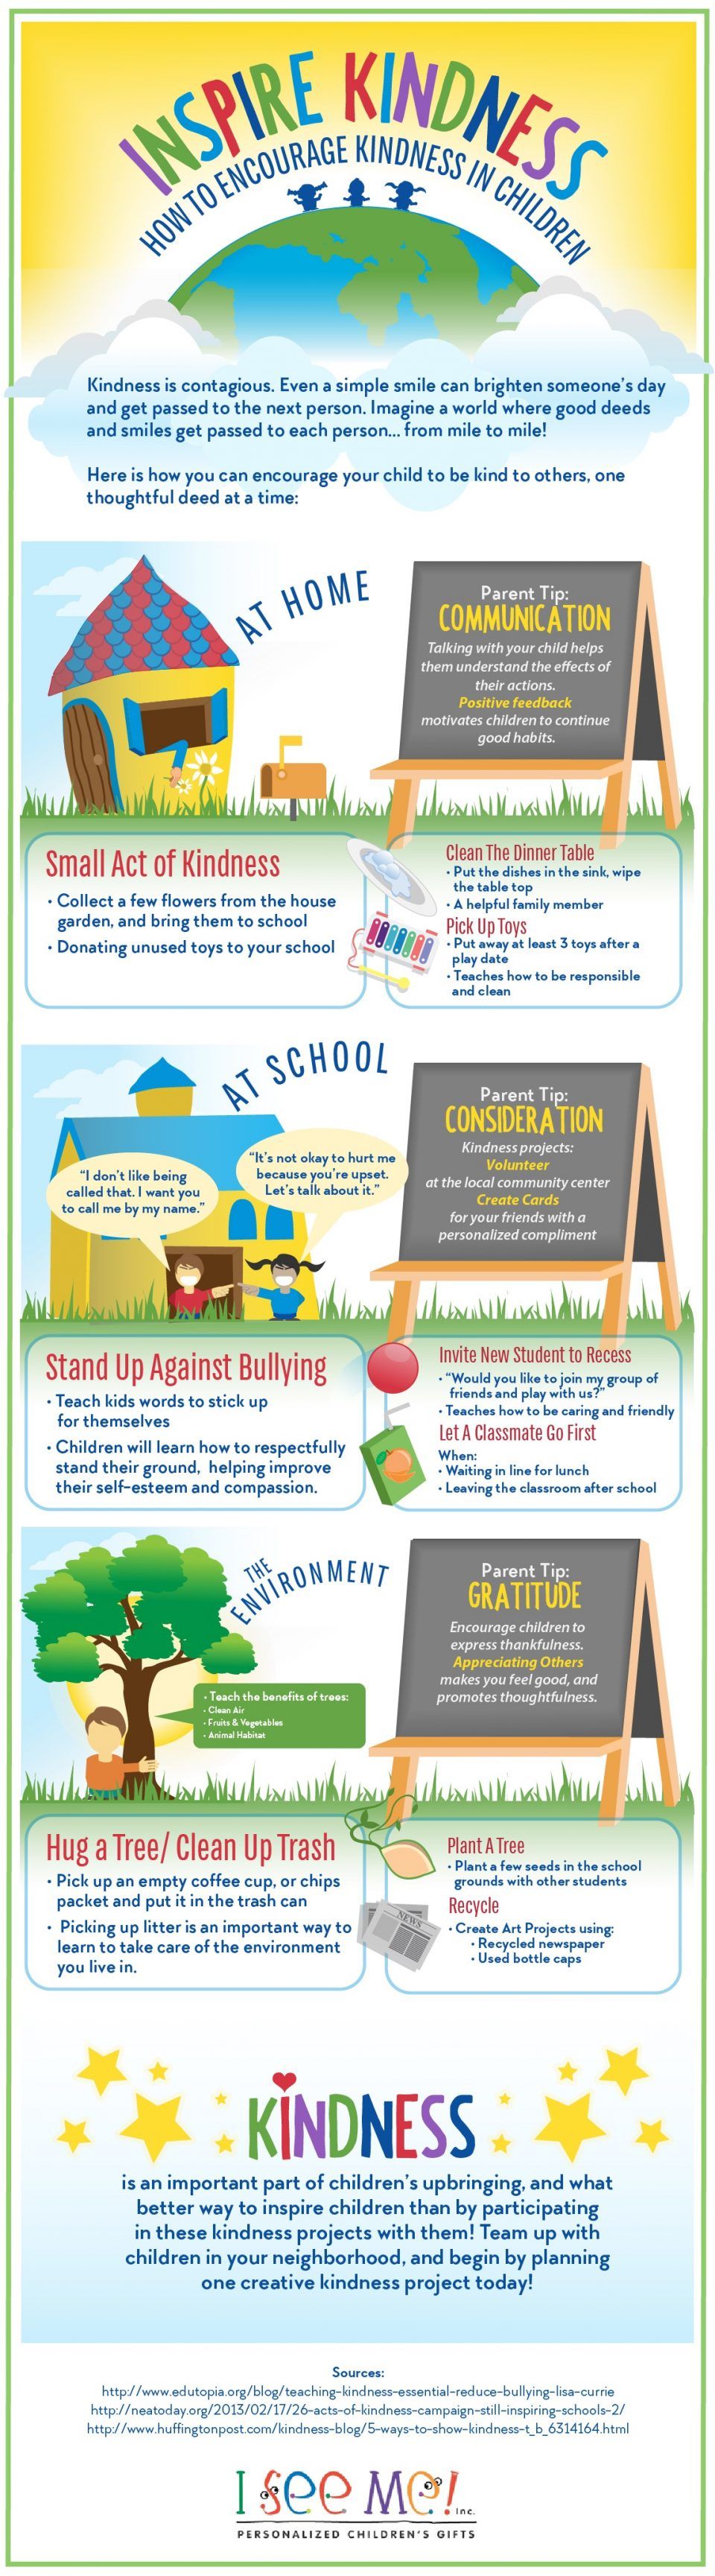 How to Encourage Kindness in Children Infographic